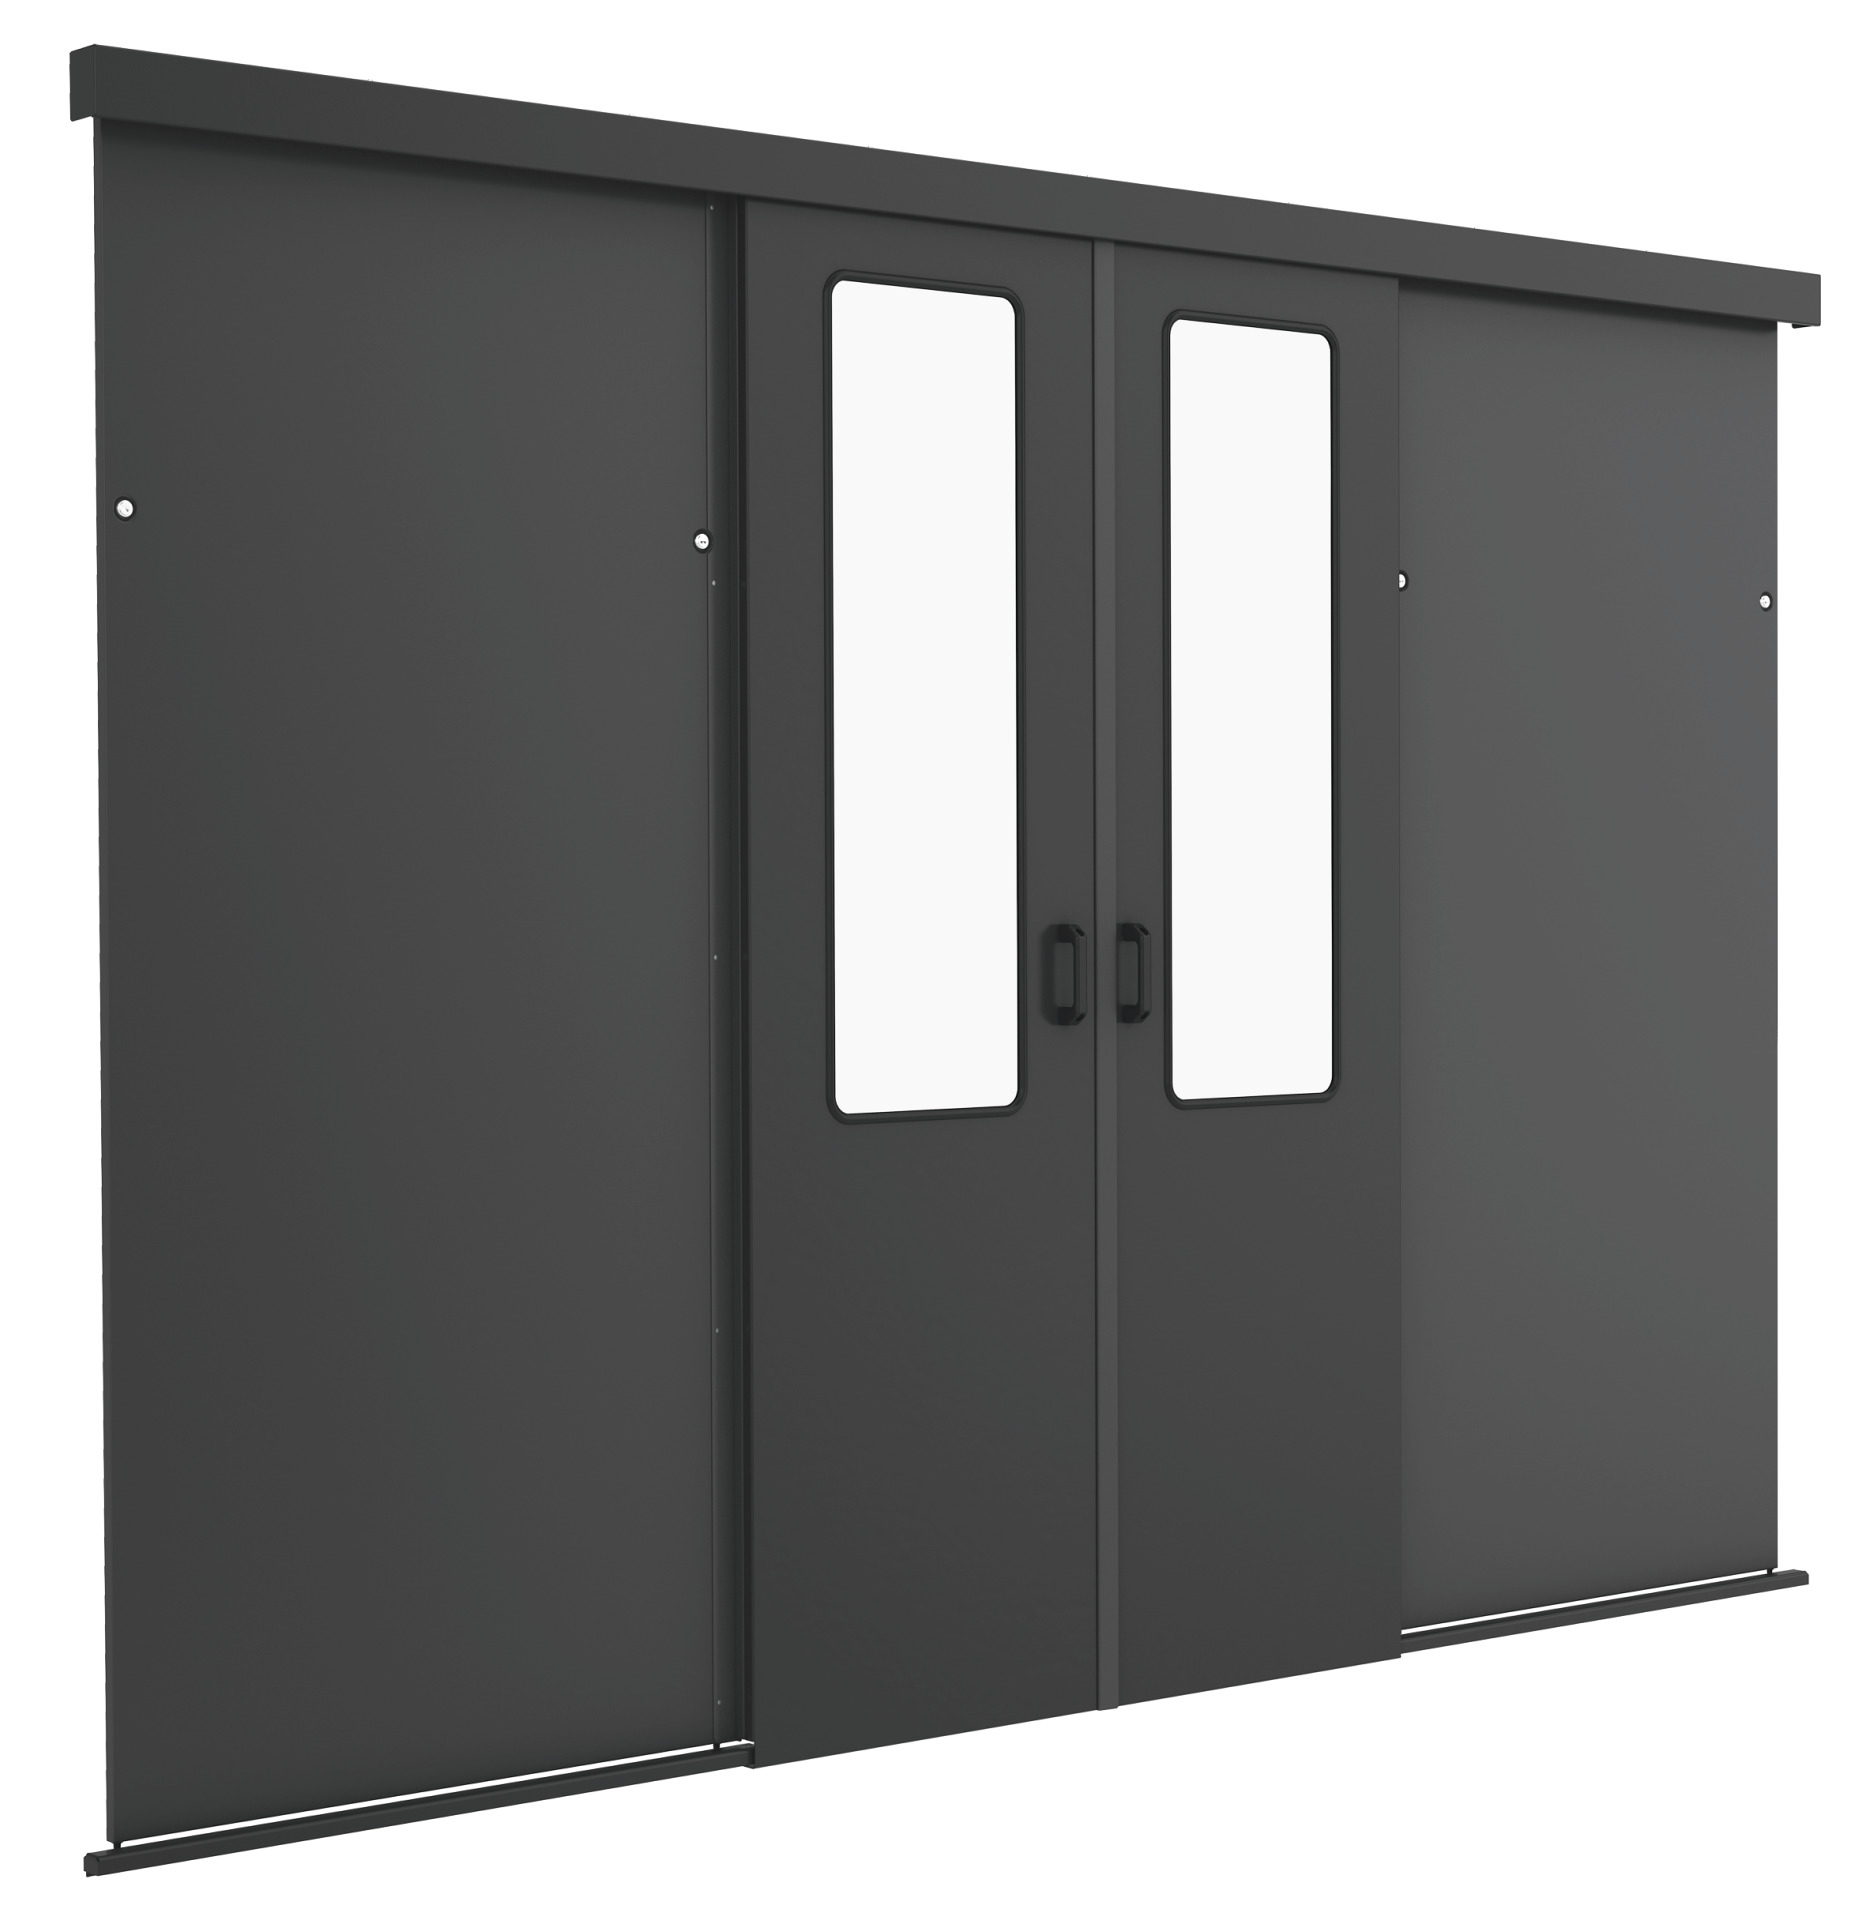 Slidiung Door for Cold/Warm Aisle for PRO 47U +100 mm, 1200 mm, RAL9005